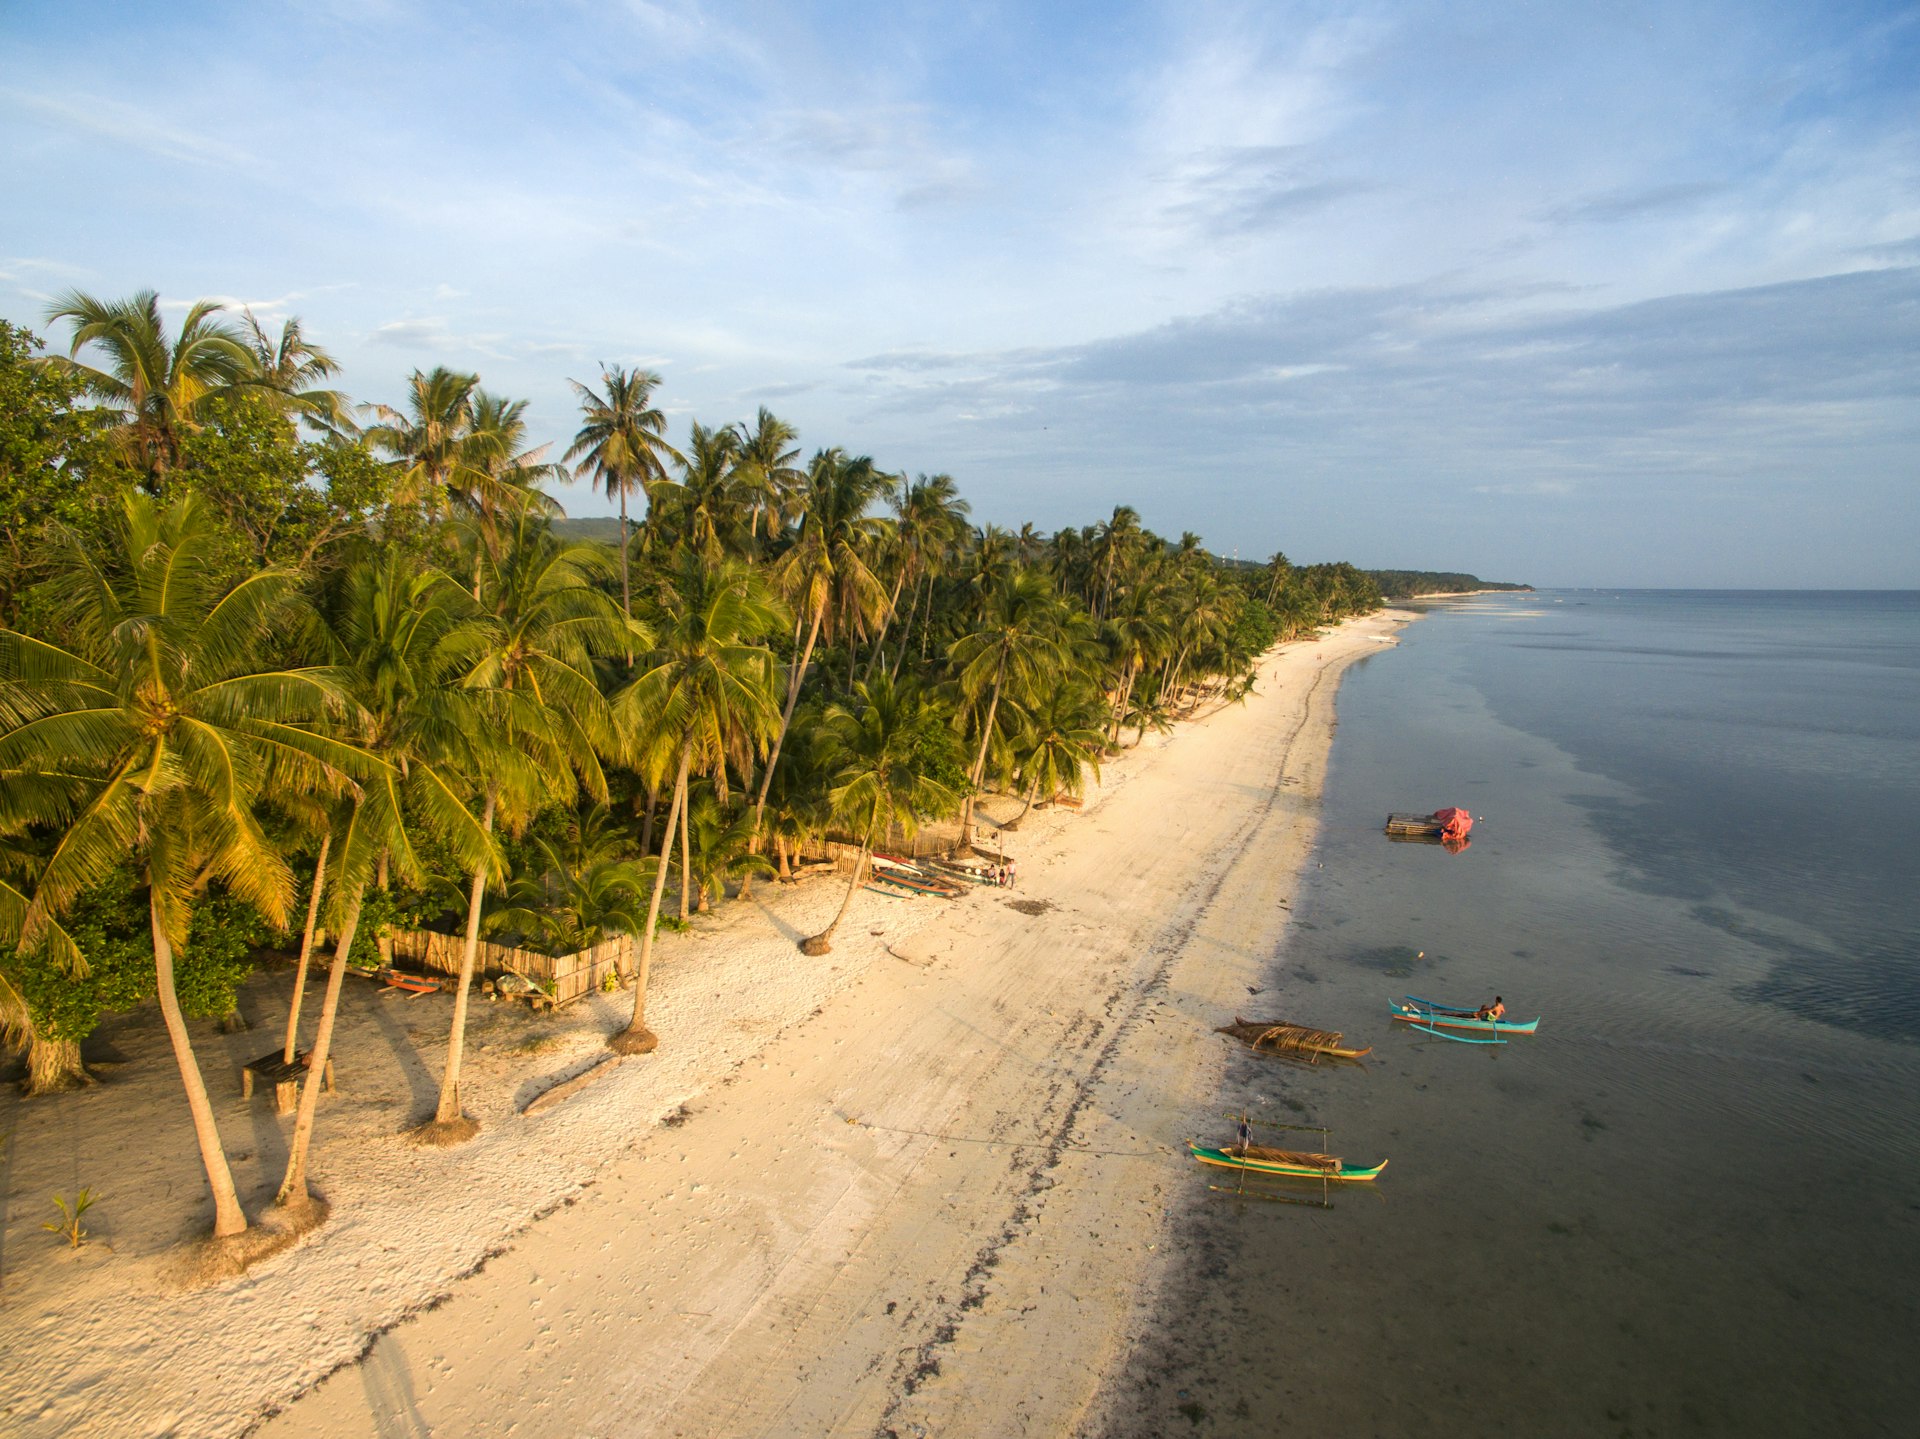 An aerial view of palm-backed Paliton Beach on Siquijor Island. The beach has white sands and is lapped by shallow blue waters.